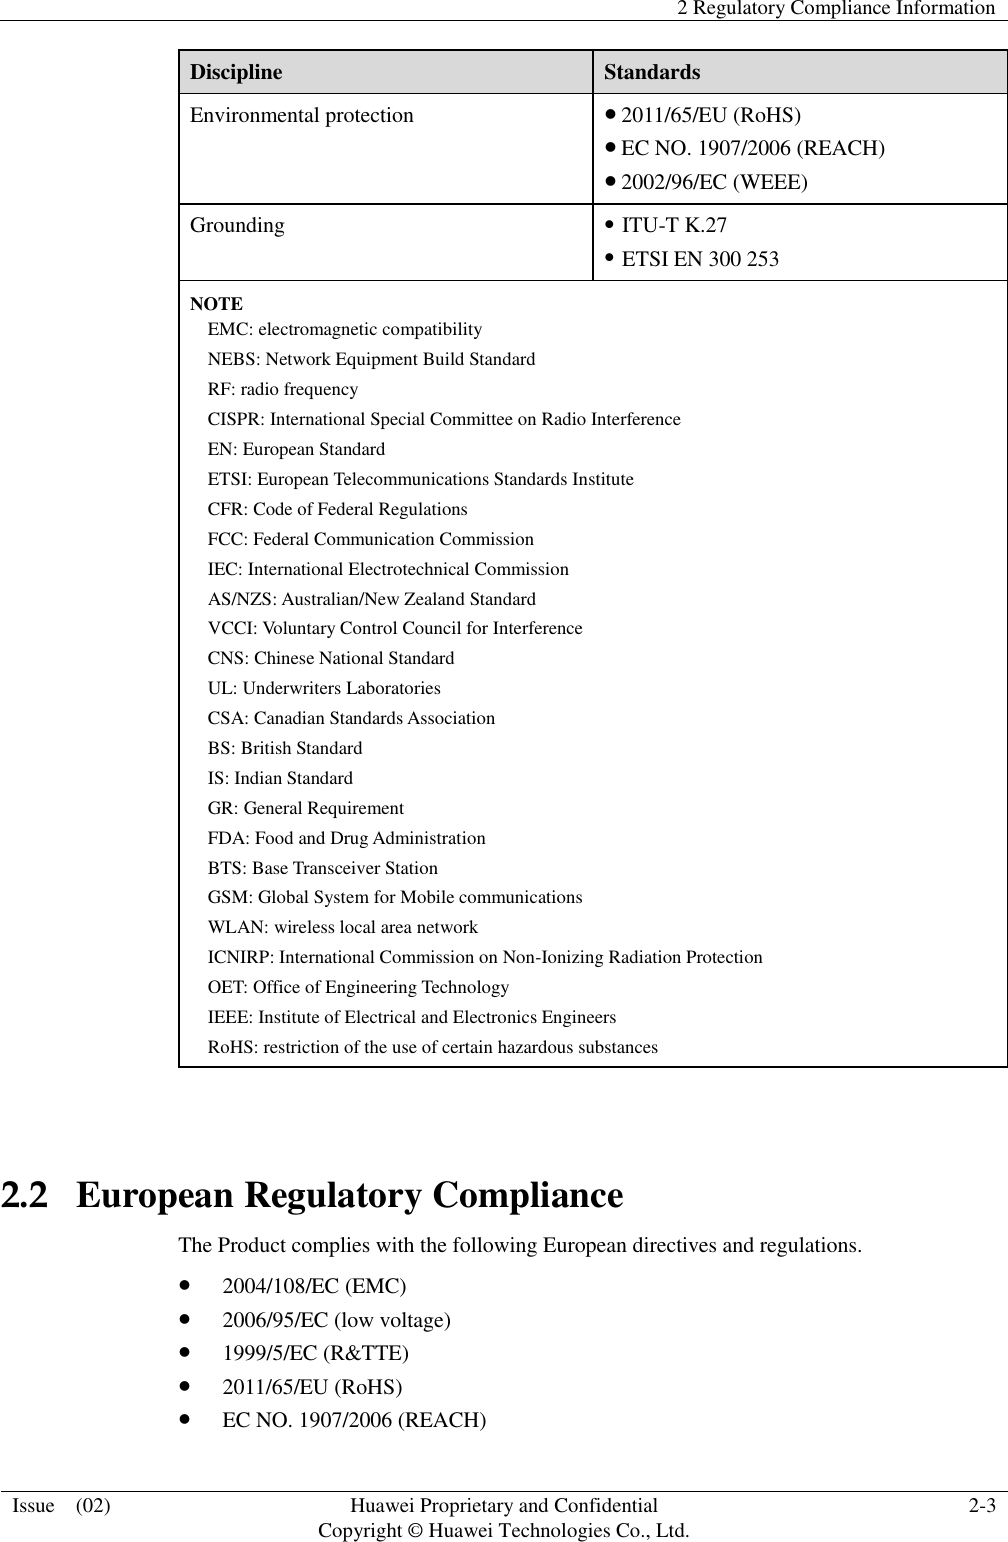   2 Regulatory Compliance Information  Issue    (02) Huawei Proprietary and Confidential                                     Copyright © Huawei Technologies Co., Ltd. 2-3  Discipline Standards Environmental protection  2011/65/EU (RoHS)  EC NO. 1907/2006 (REACH)  2002/96/EC (WEEE) Grounding  ITU-T K.27  ETSI EN 300 253 NOTE EMC: electromagnetic compatibility NEBS: Network Equipment Build Standard RF: radio frequency CISPR: International Special Committee on Radio Interference EN: European Standard ETSI: European Telecommunications Standards Institute CFR: Code of Federal Regulations FCC: Federal Communication Commission IEC: International Electrotechnical Commission AS/NZS: Australian/New Zealand Standard VCCI: Voluntary Control Council for Interference CNS: Chinese National Standard UL: Underwriters Laboratories CSA: Canadian Standards Association BS: British Standard IS: Indian Standard GR: General Requirement FDA: Food and Drug Administration BTS: Base Transceiver Station GSM: Global System for Mobile communications WLAN: wireless local area network ICNIRP: International Commission on Non-Ionizing Radiation Protection OET: Office of Engineering Technology IEEE: Institute of Electrical and Electronics Engineers RoHS: restriction of the use of certain hazardous substances  2.2   European Regulatory Compliance The Product complies with the following European directives and regulations.  2004/108/EC (EMC)  2006/95/EC (low voltage)  1999/5/EC (R&amp;TTE)  2011/65/EU (RoHS)  EC NO. 1907/2006 (REACH) 